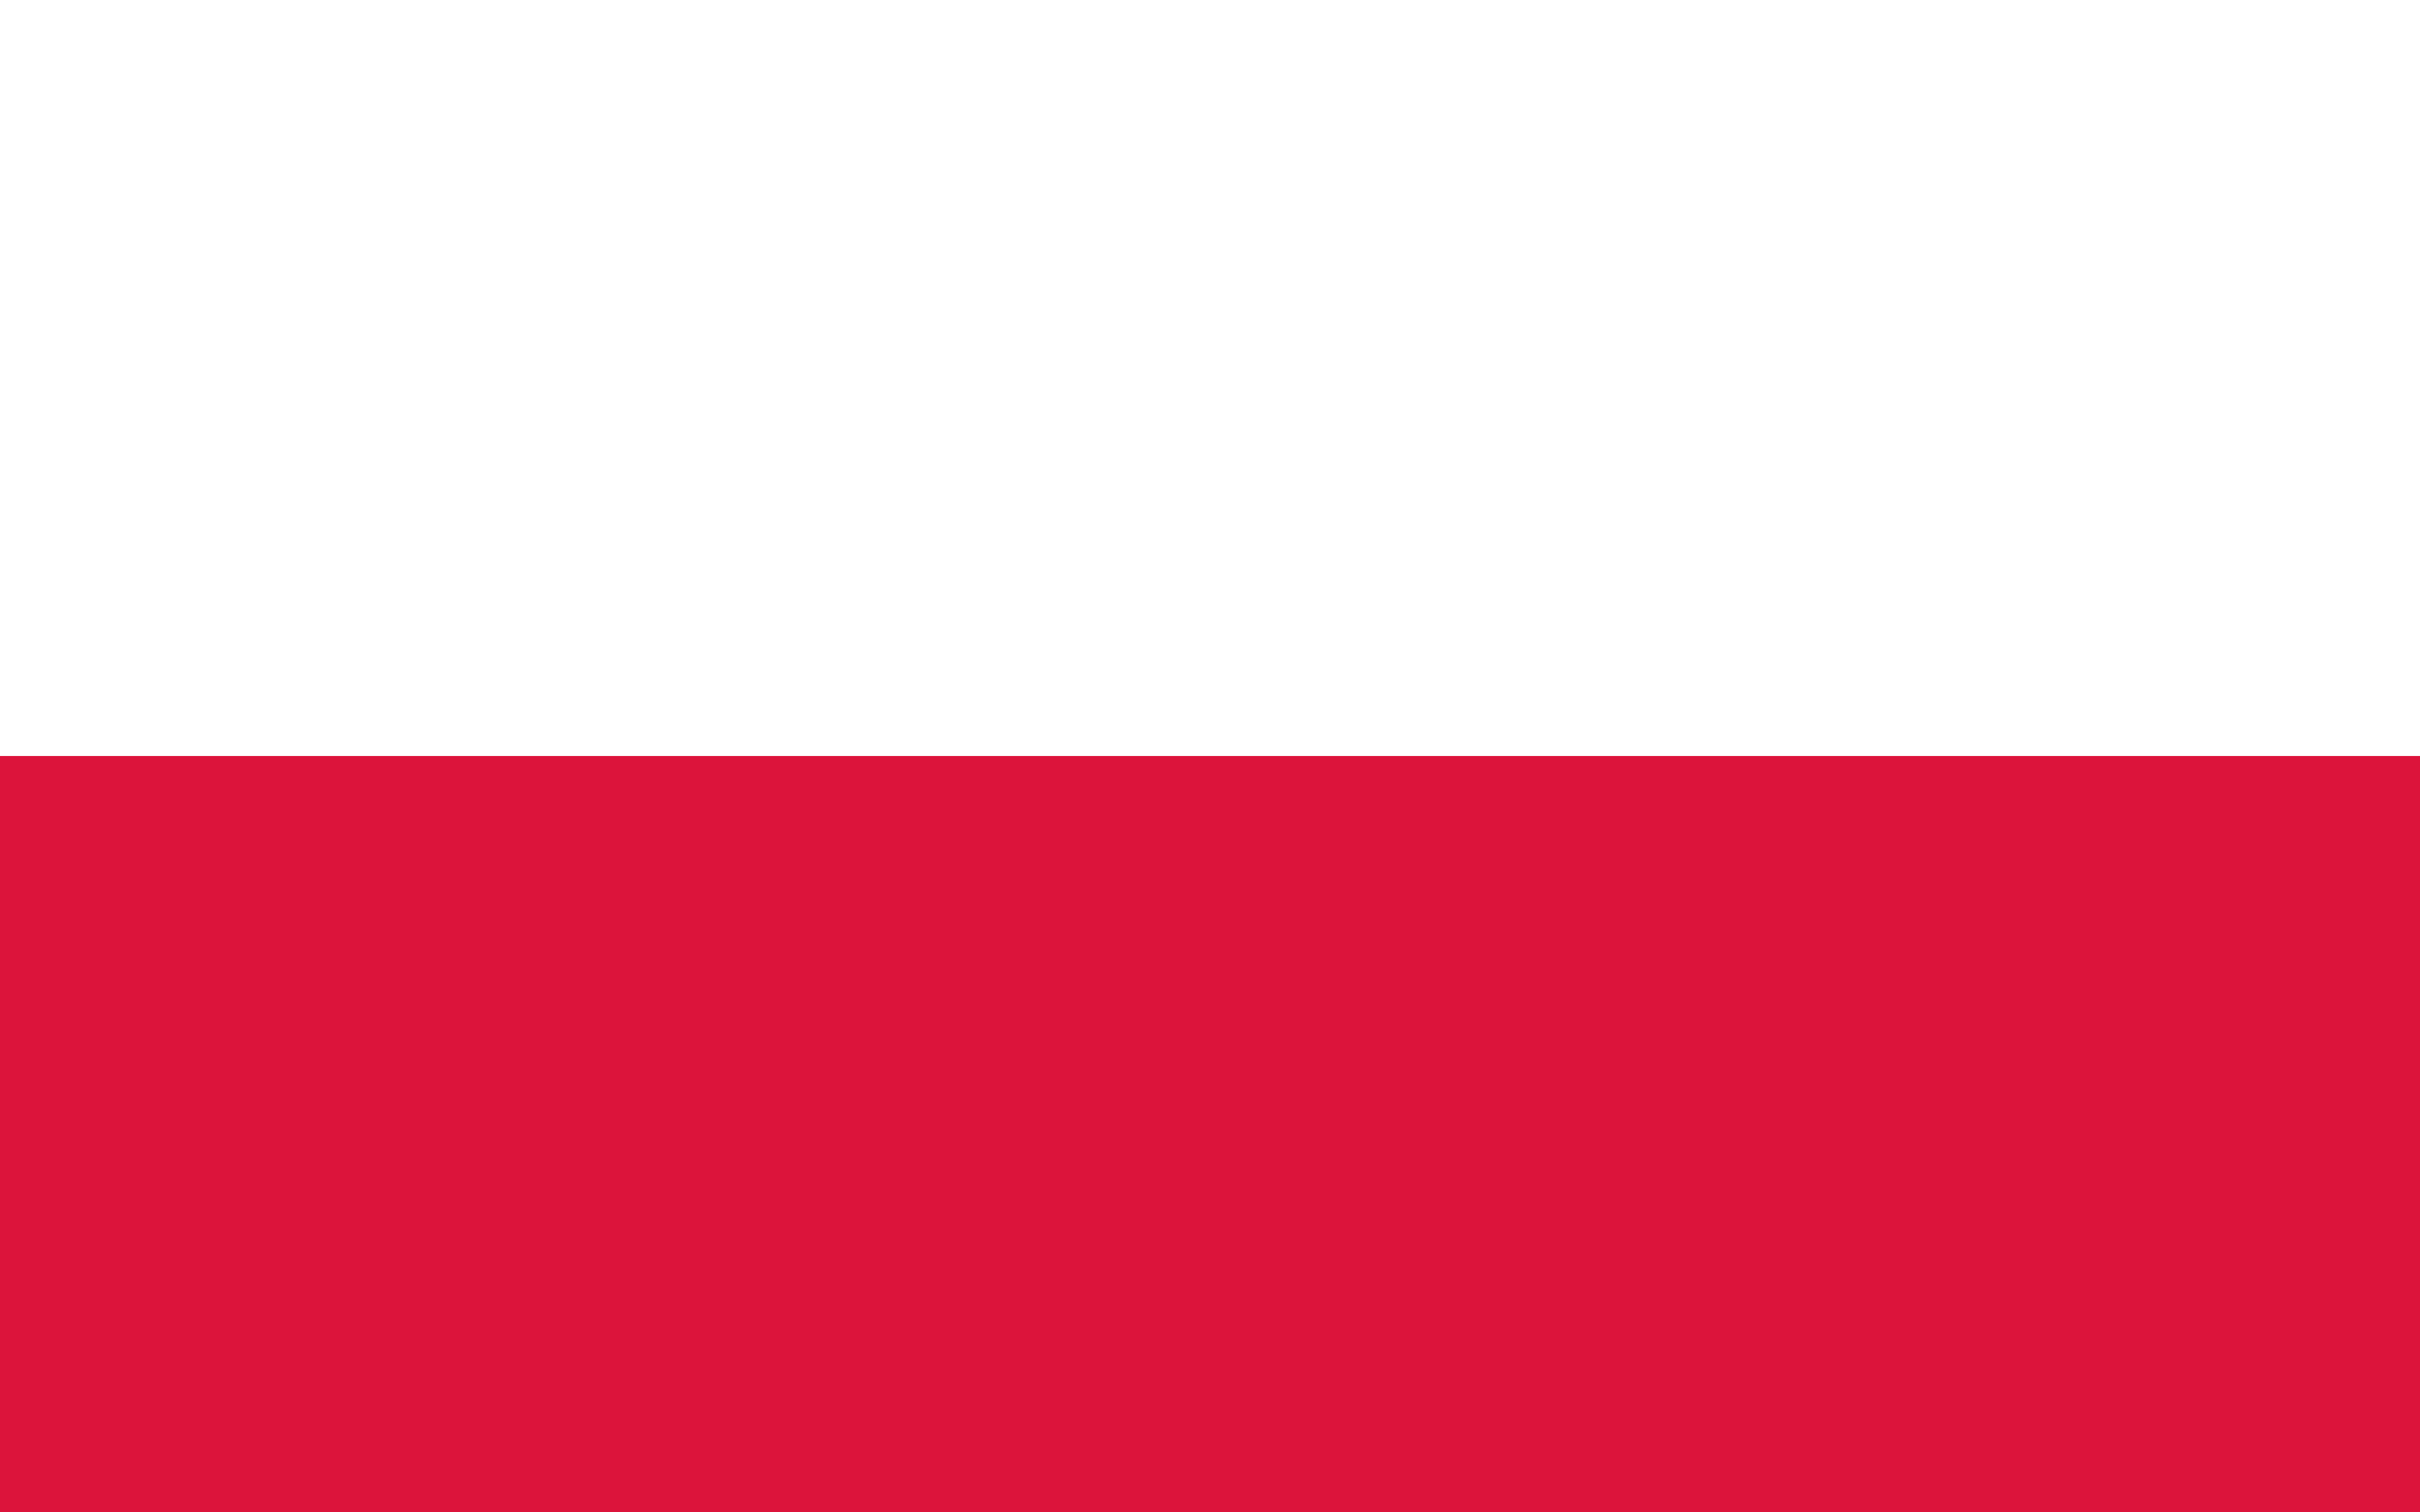 Poland Flag Image Free Download Flags Web